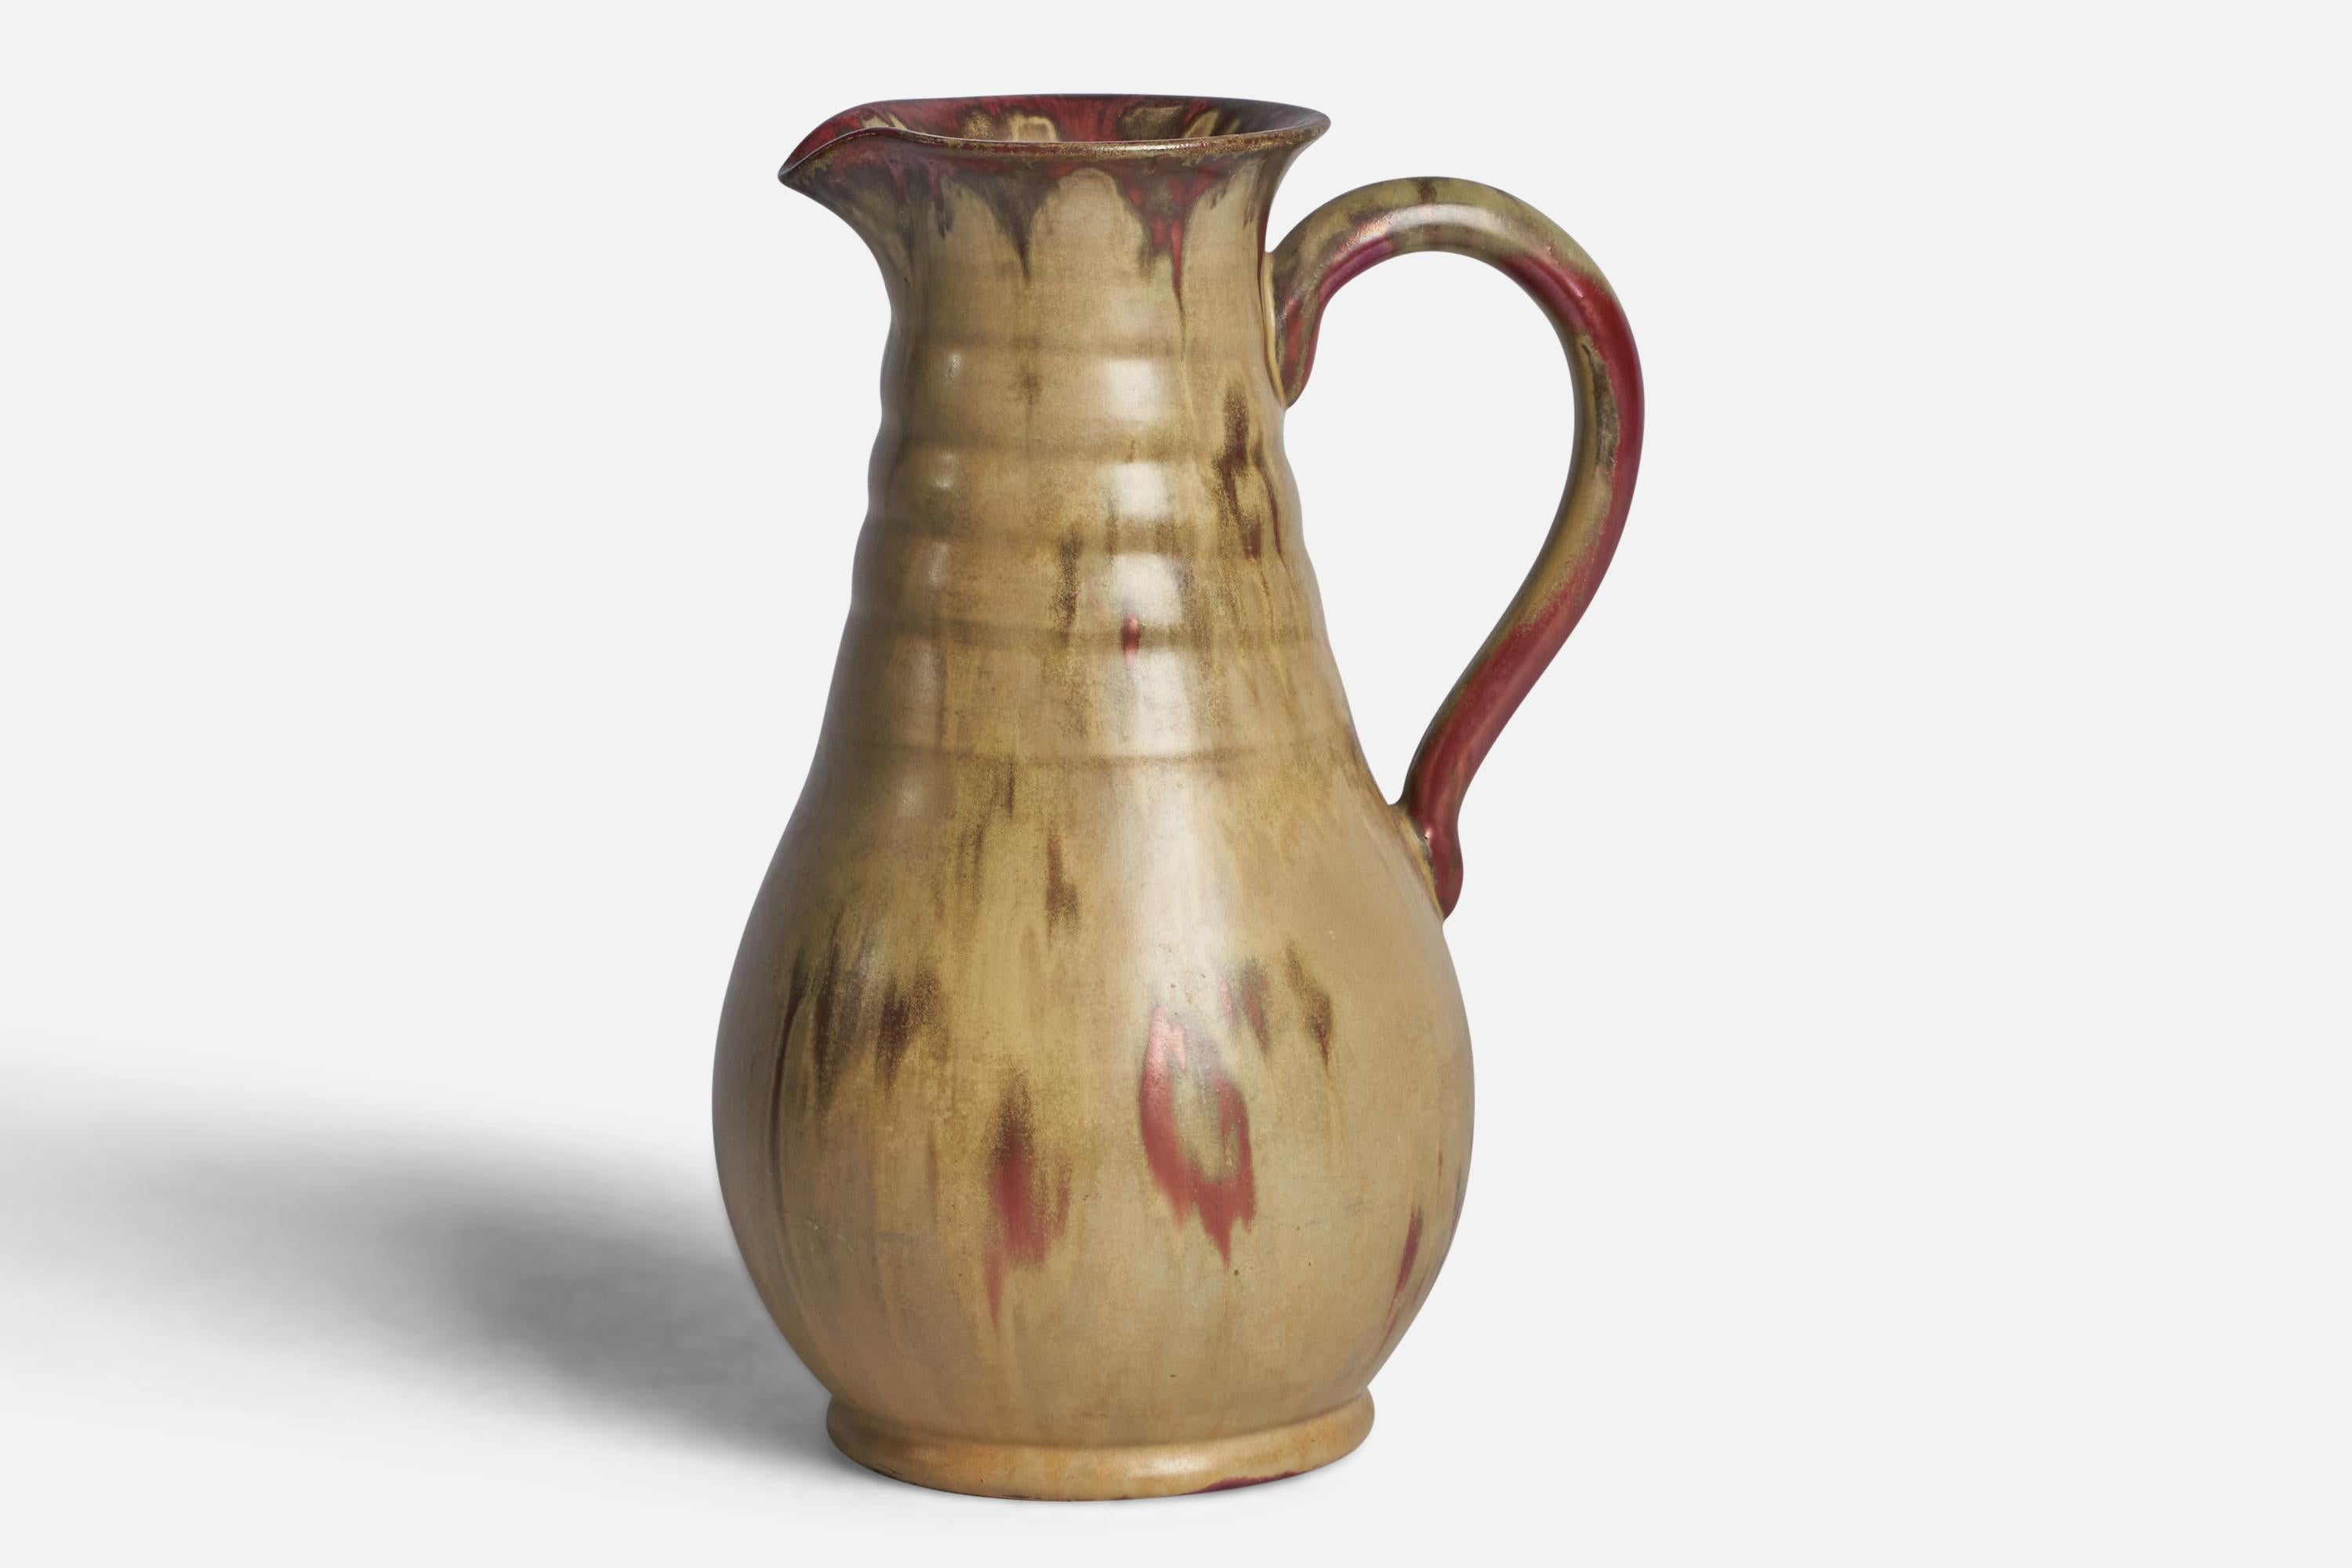 A beige-glazed stoneware pitcher designed and produced by Andersson & Johansson, Höganäs, Sweden, 1940s.